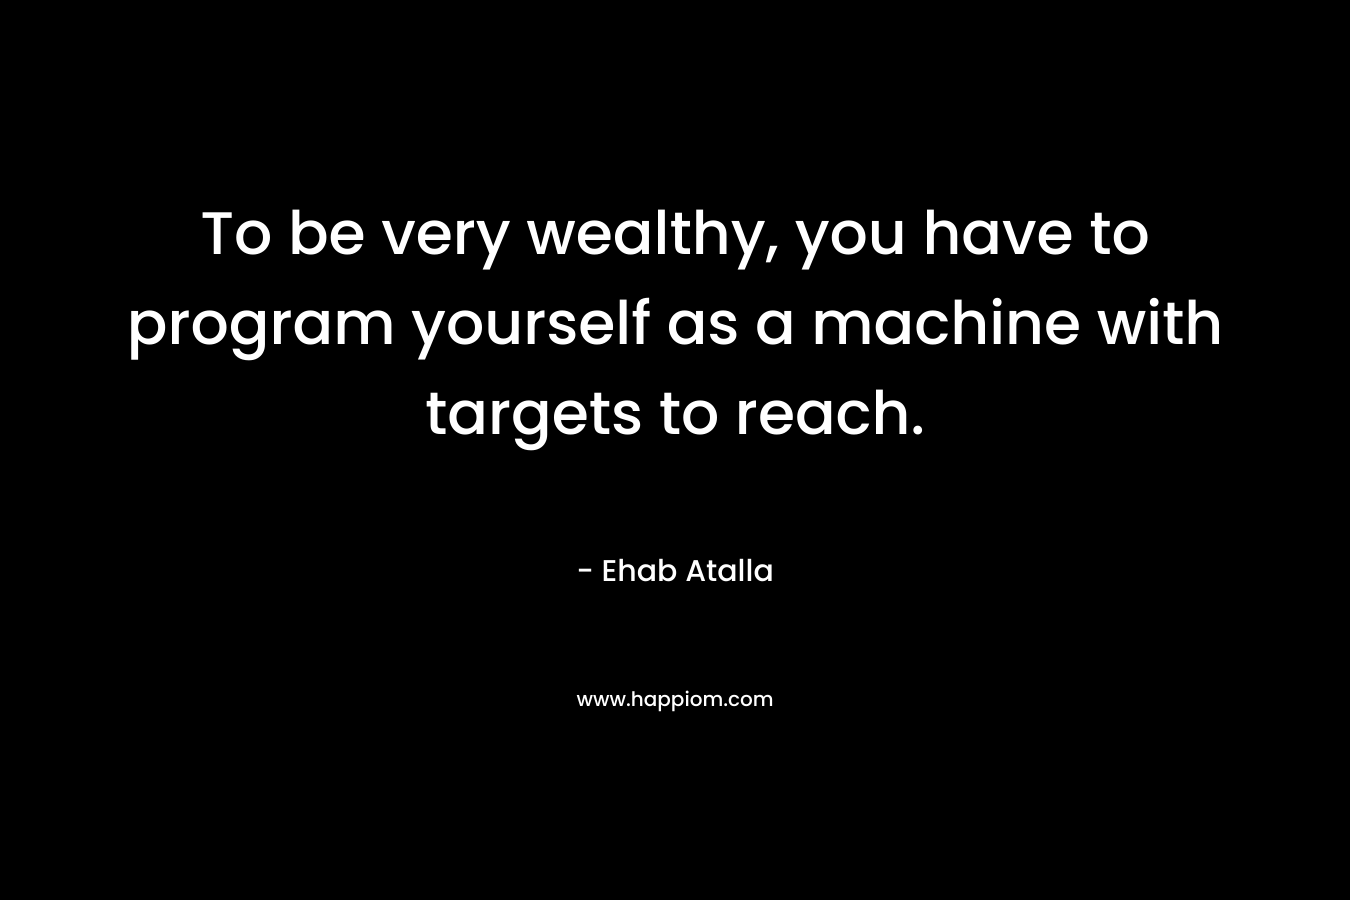 To be very wealthy, you have to program yourself as a machine with targets to reach.